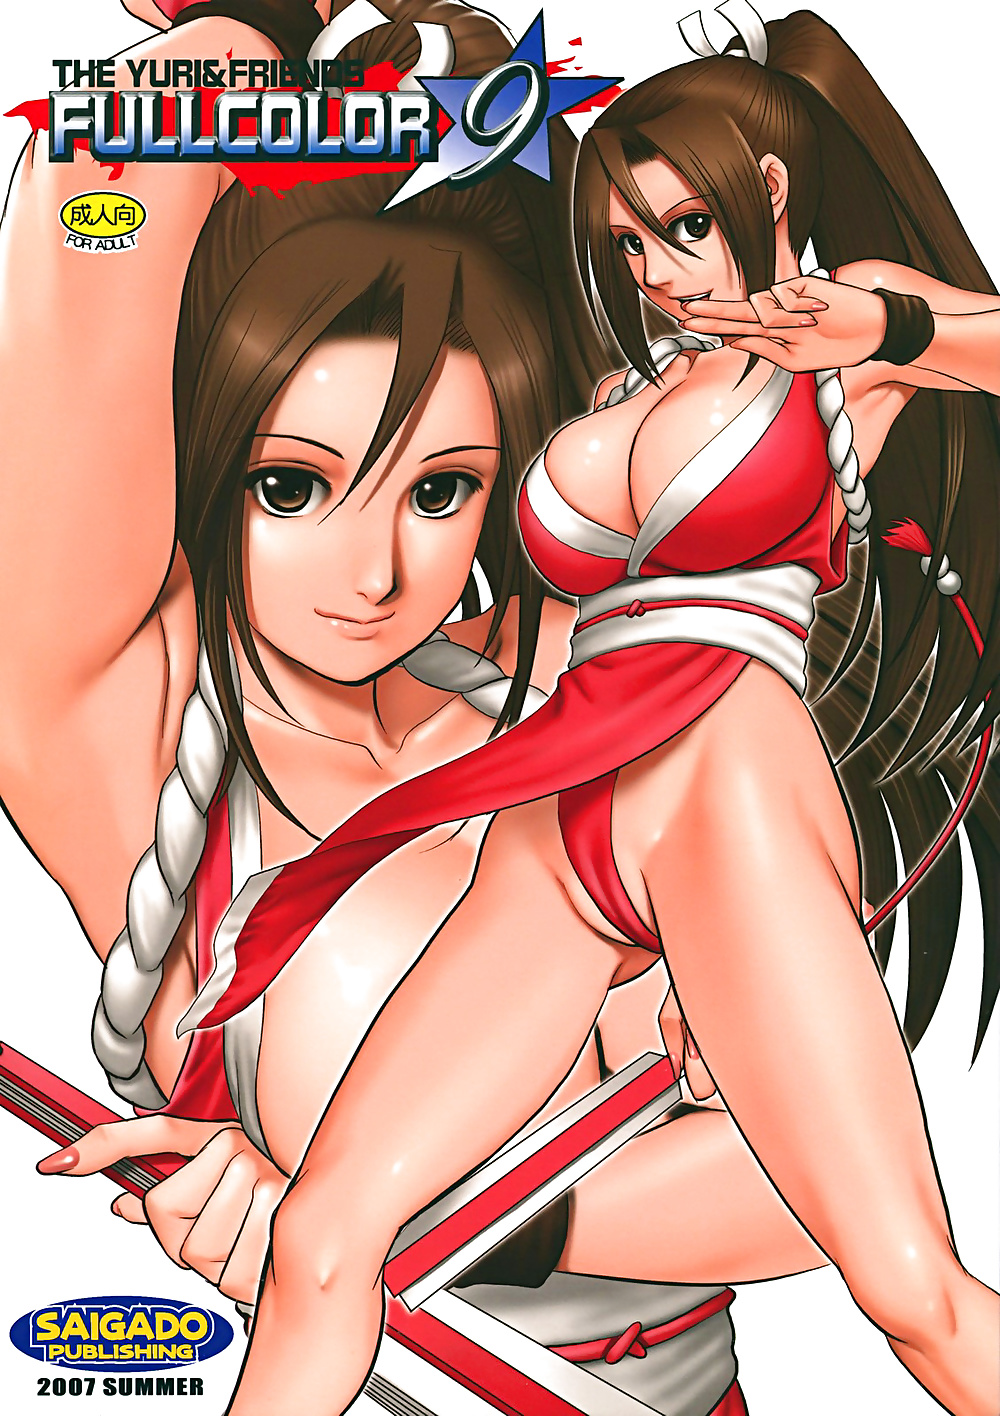 (saigado) yuri and friends 9 - king of fighters
 #33704638